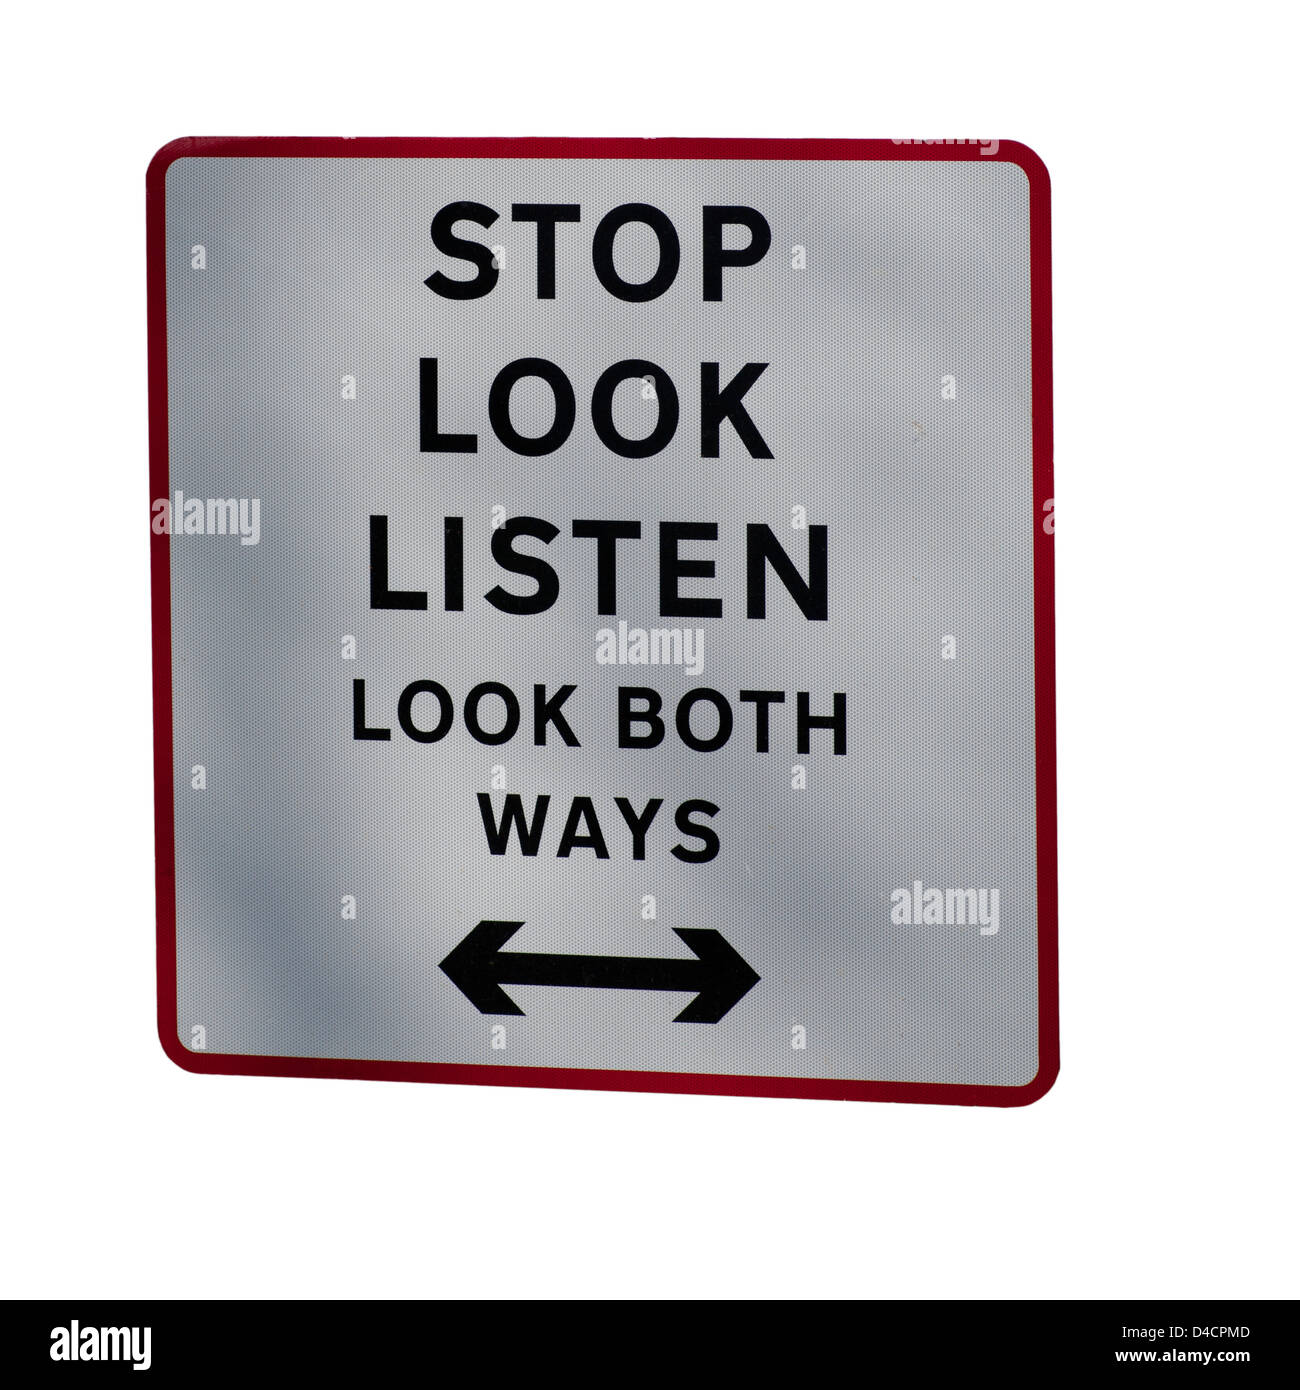 Stop Look Listen Look Both Ways Sign On an Unmanned Railway Crossing Stock Photo